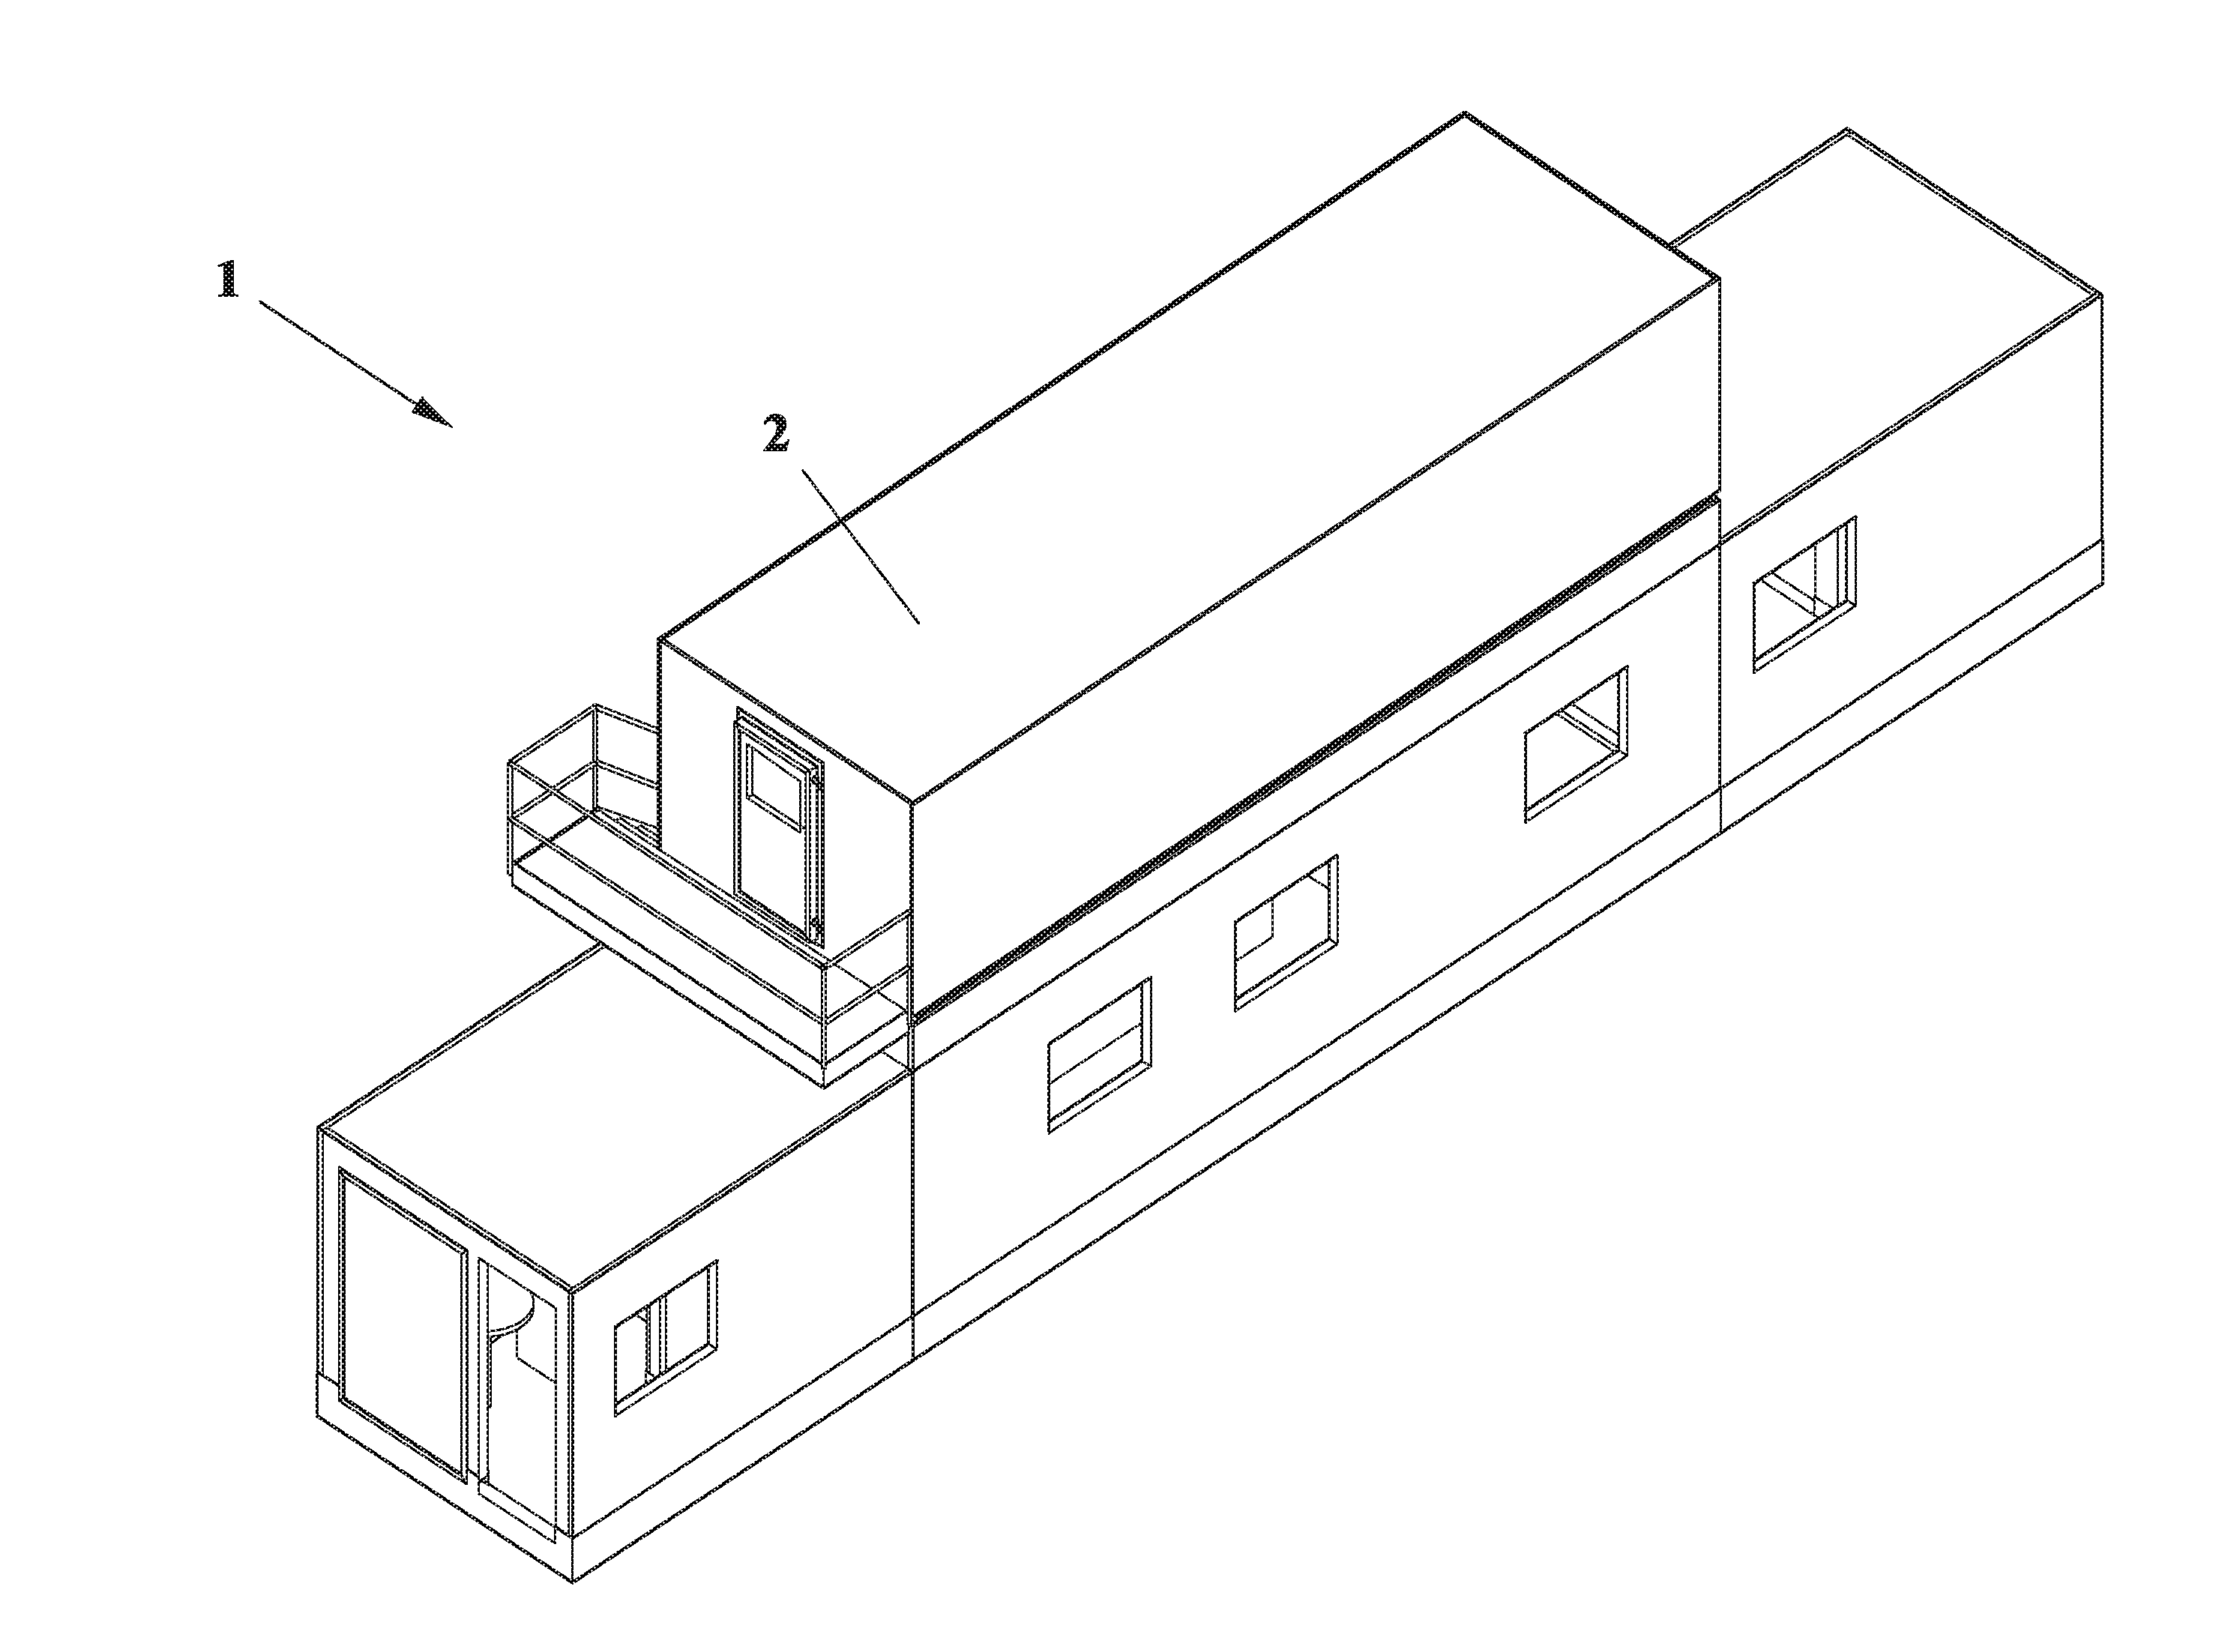 Prefabricated white chamber structure